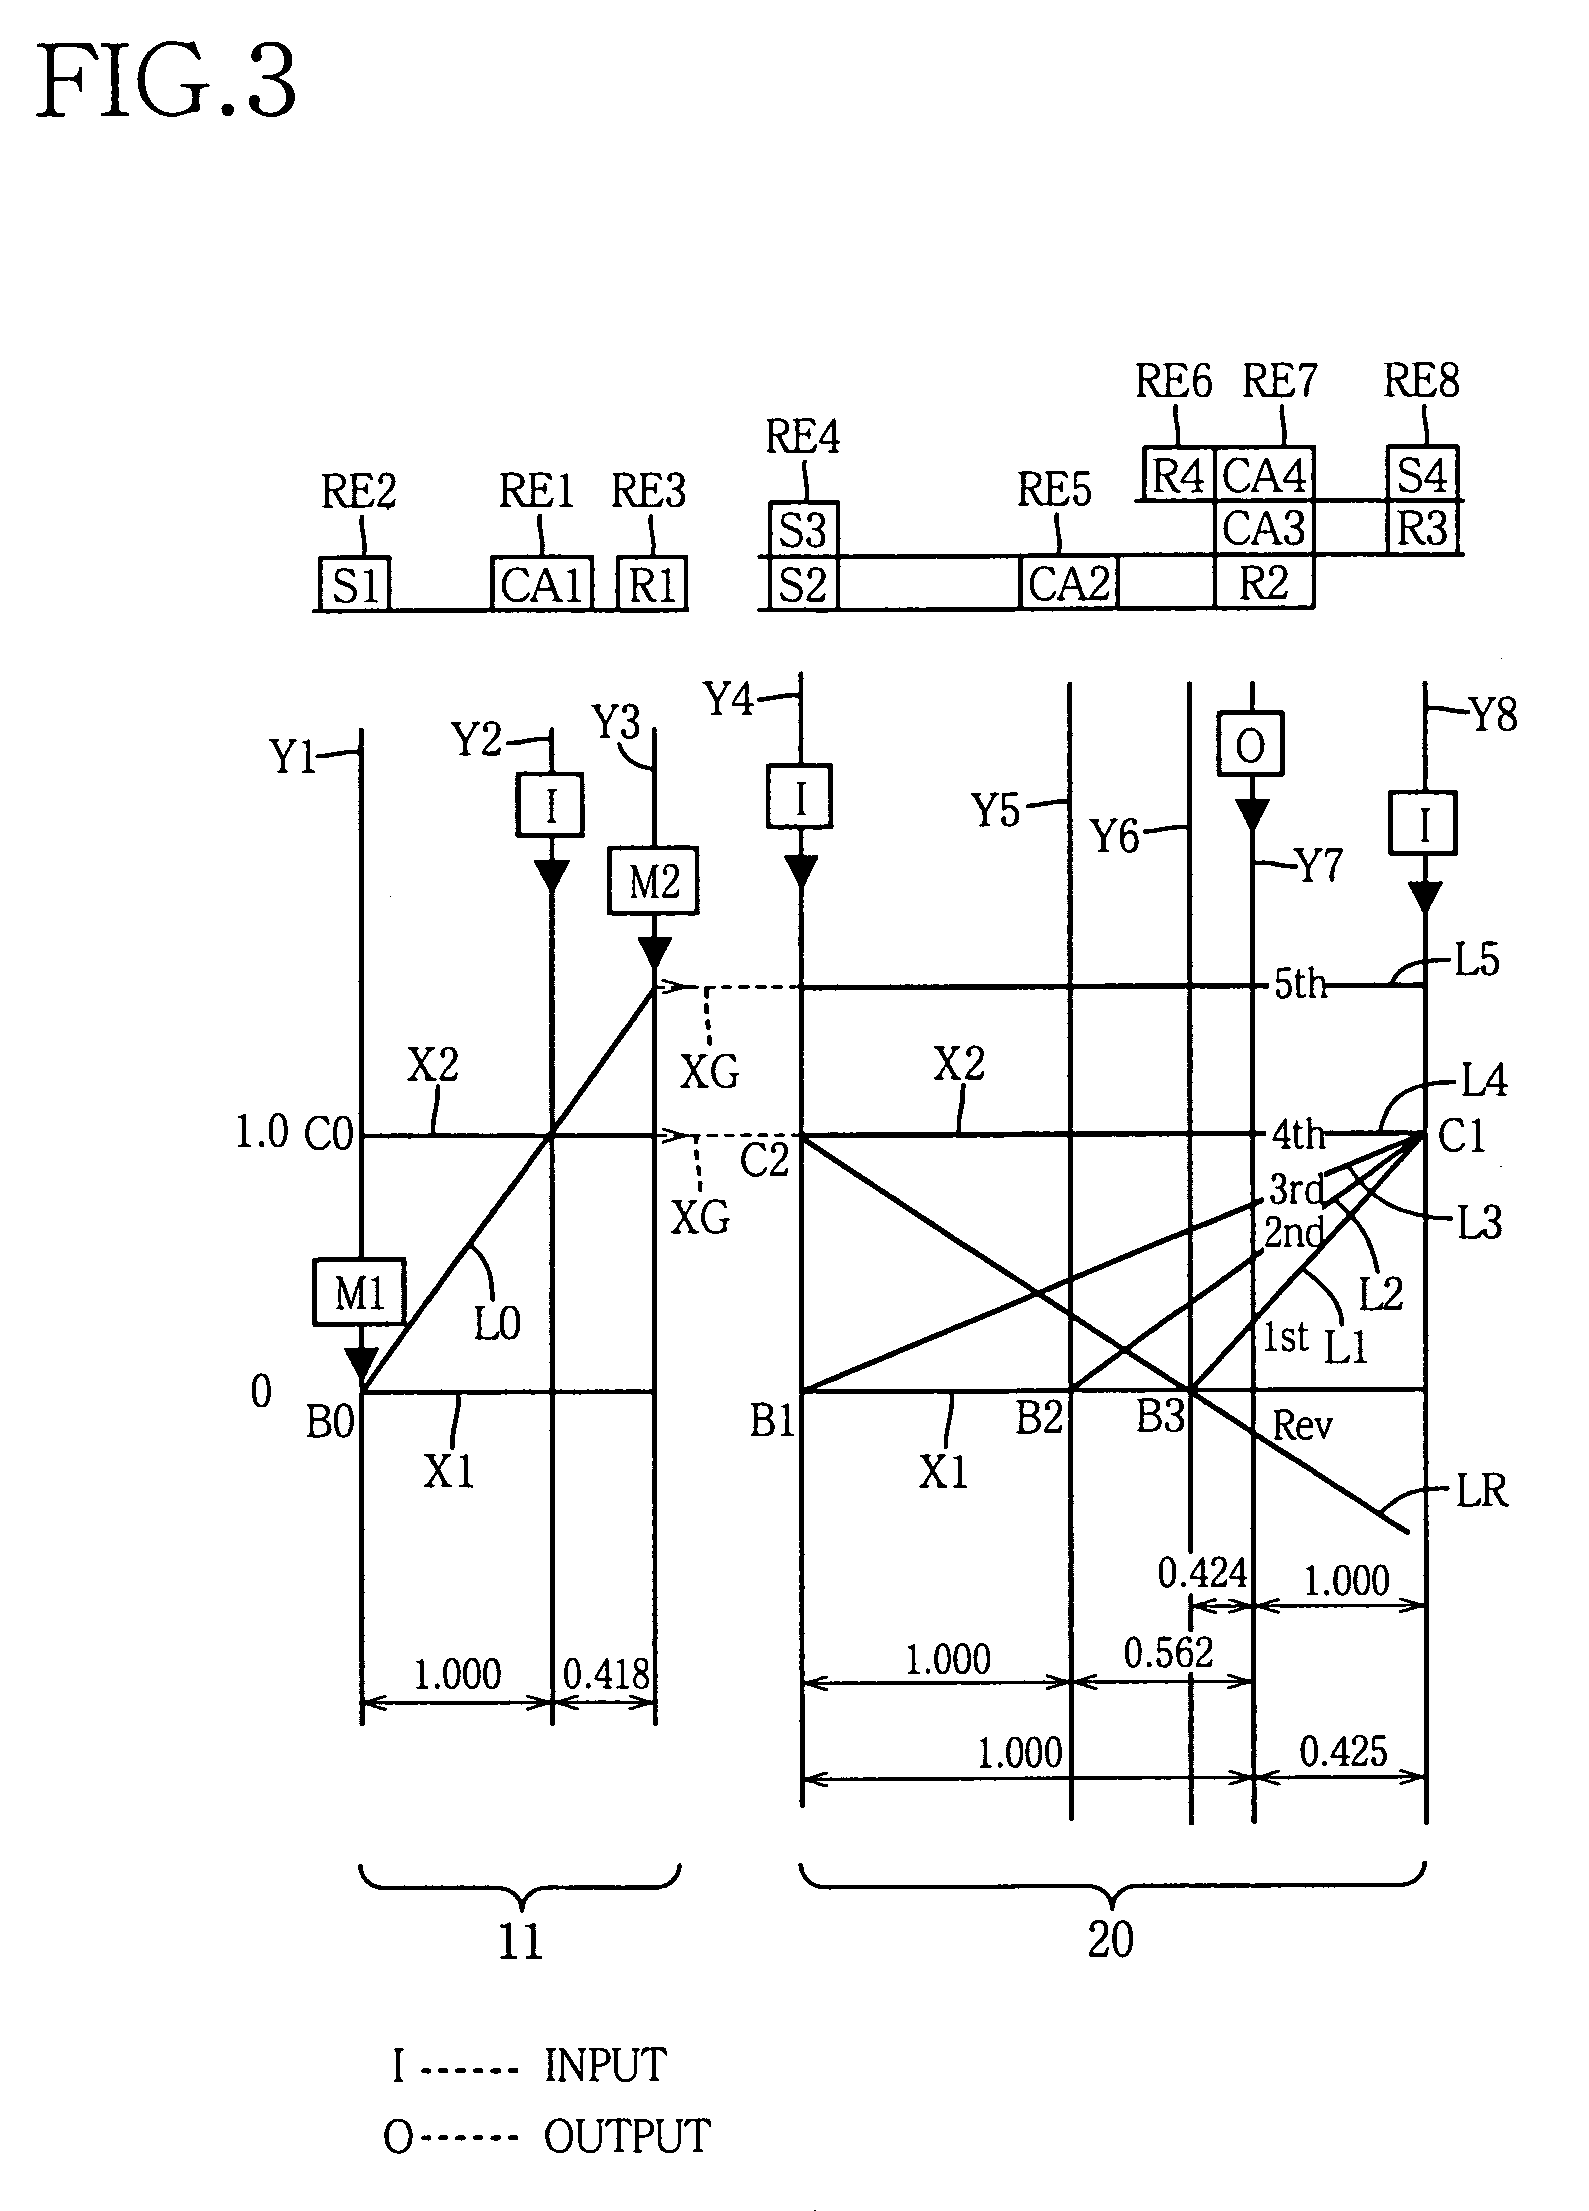 Control apparatus for use with driving device of vehicle